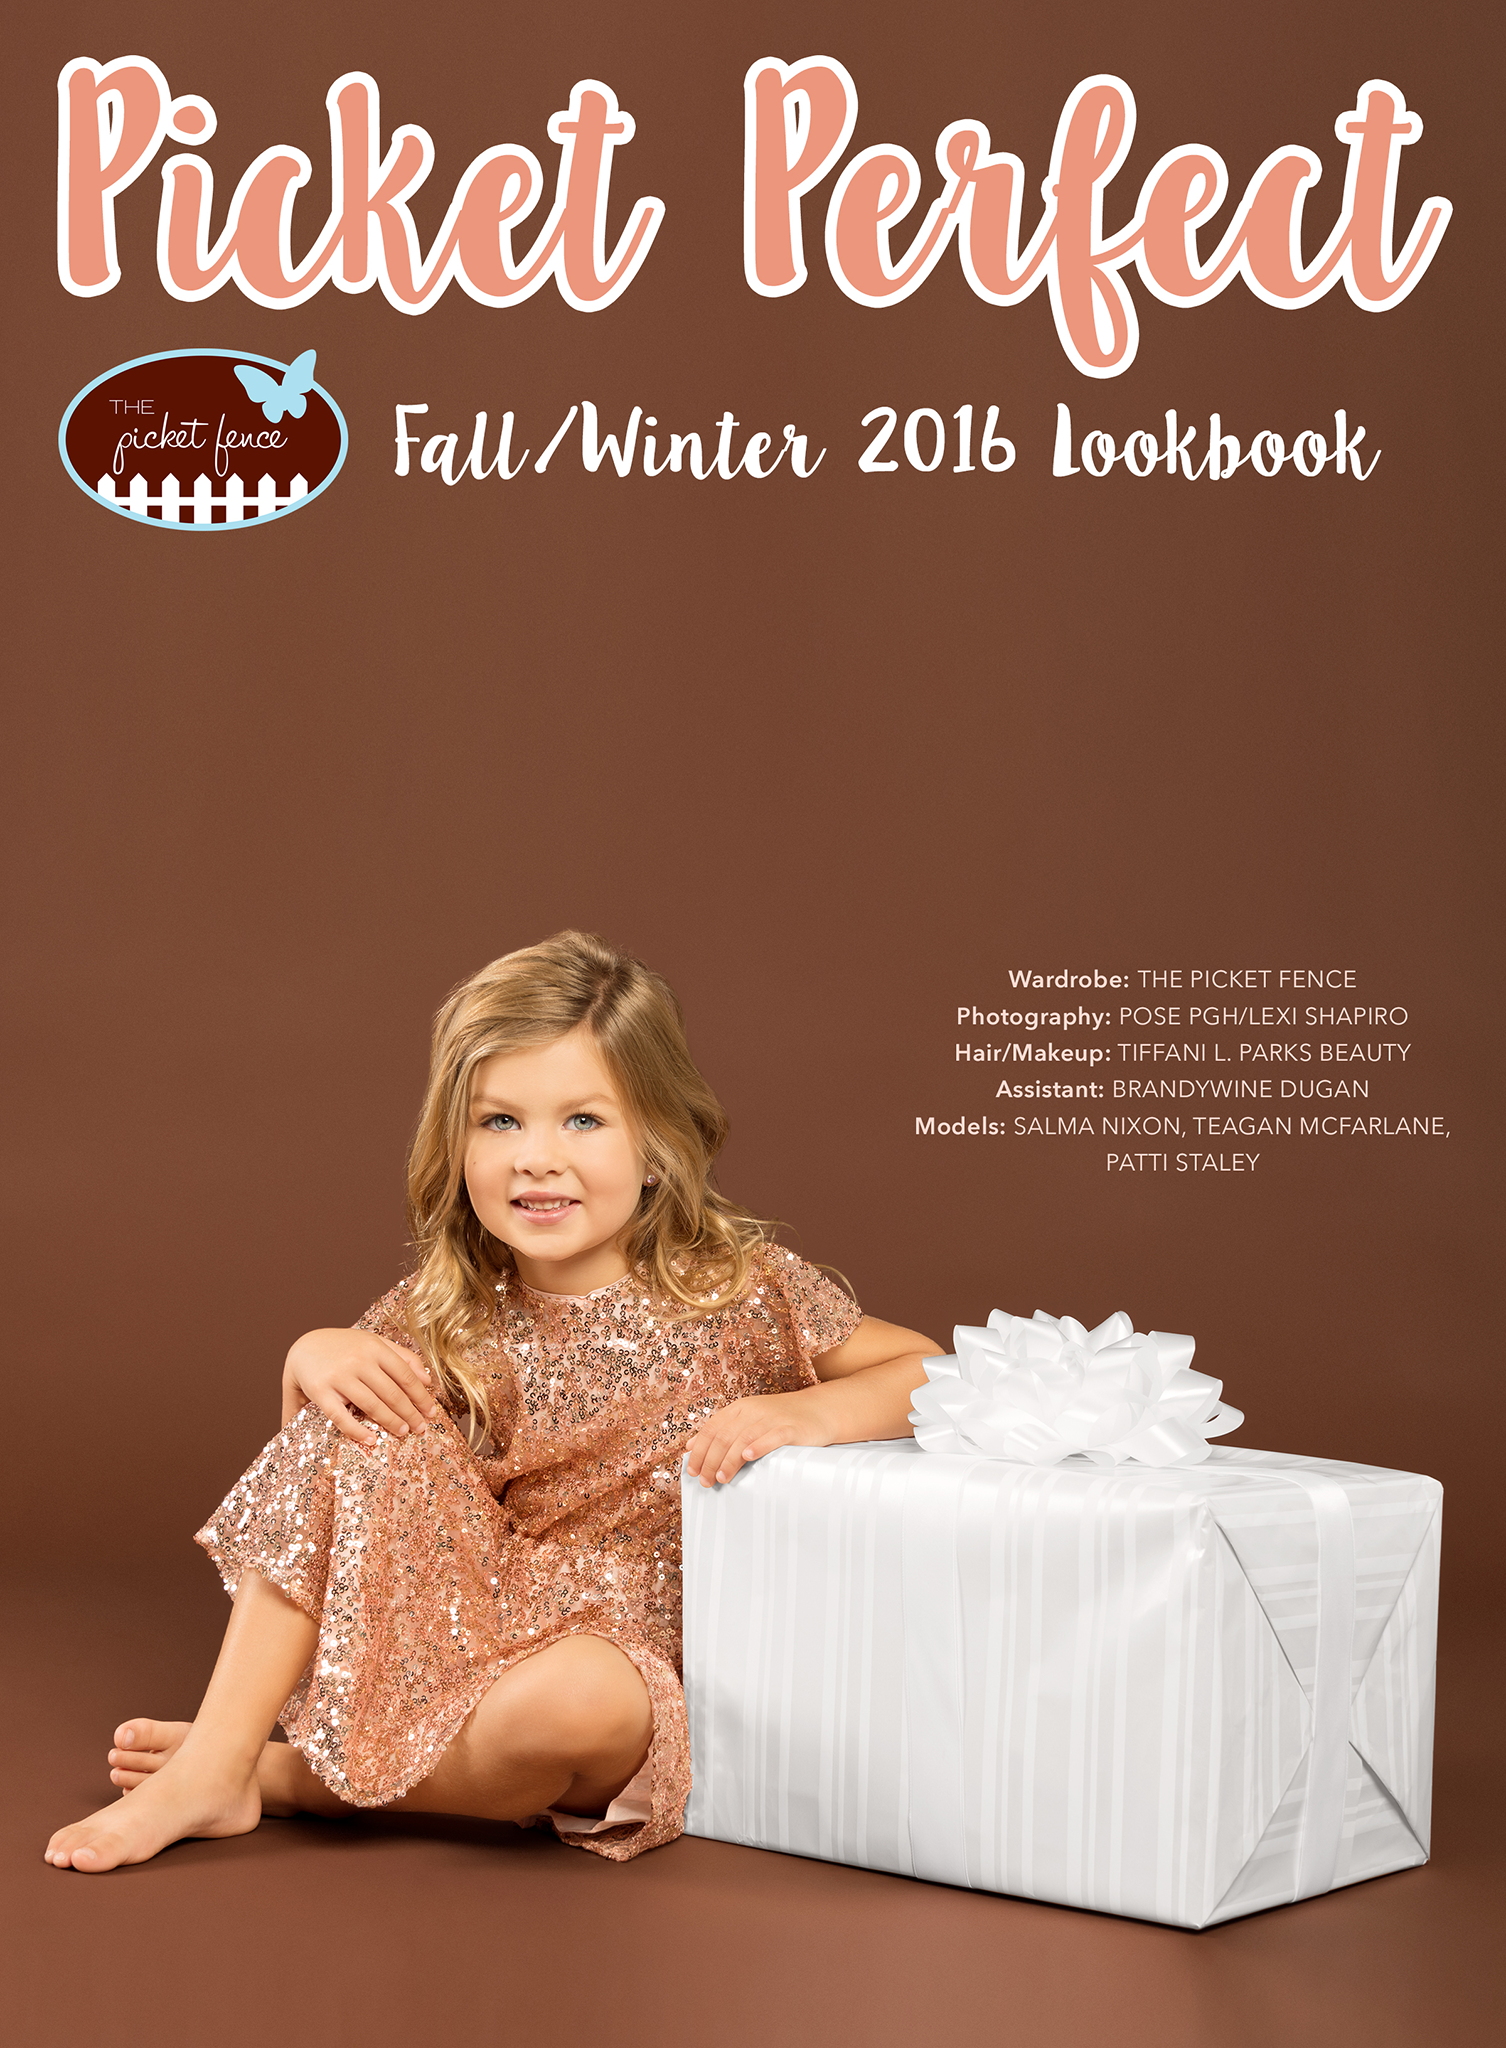 Picket Perfect Holiday Look Book